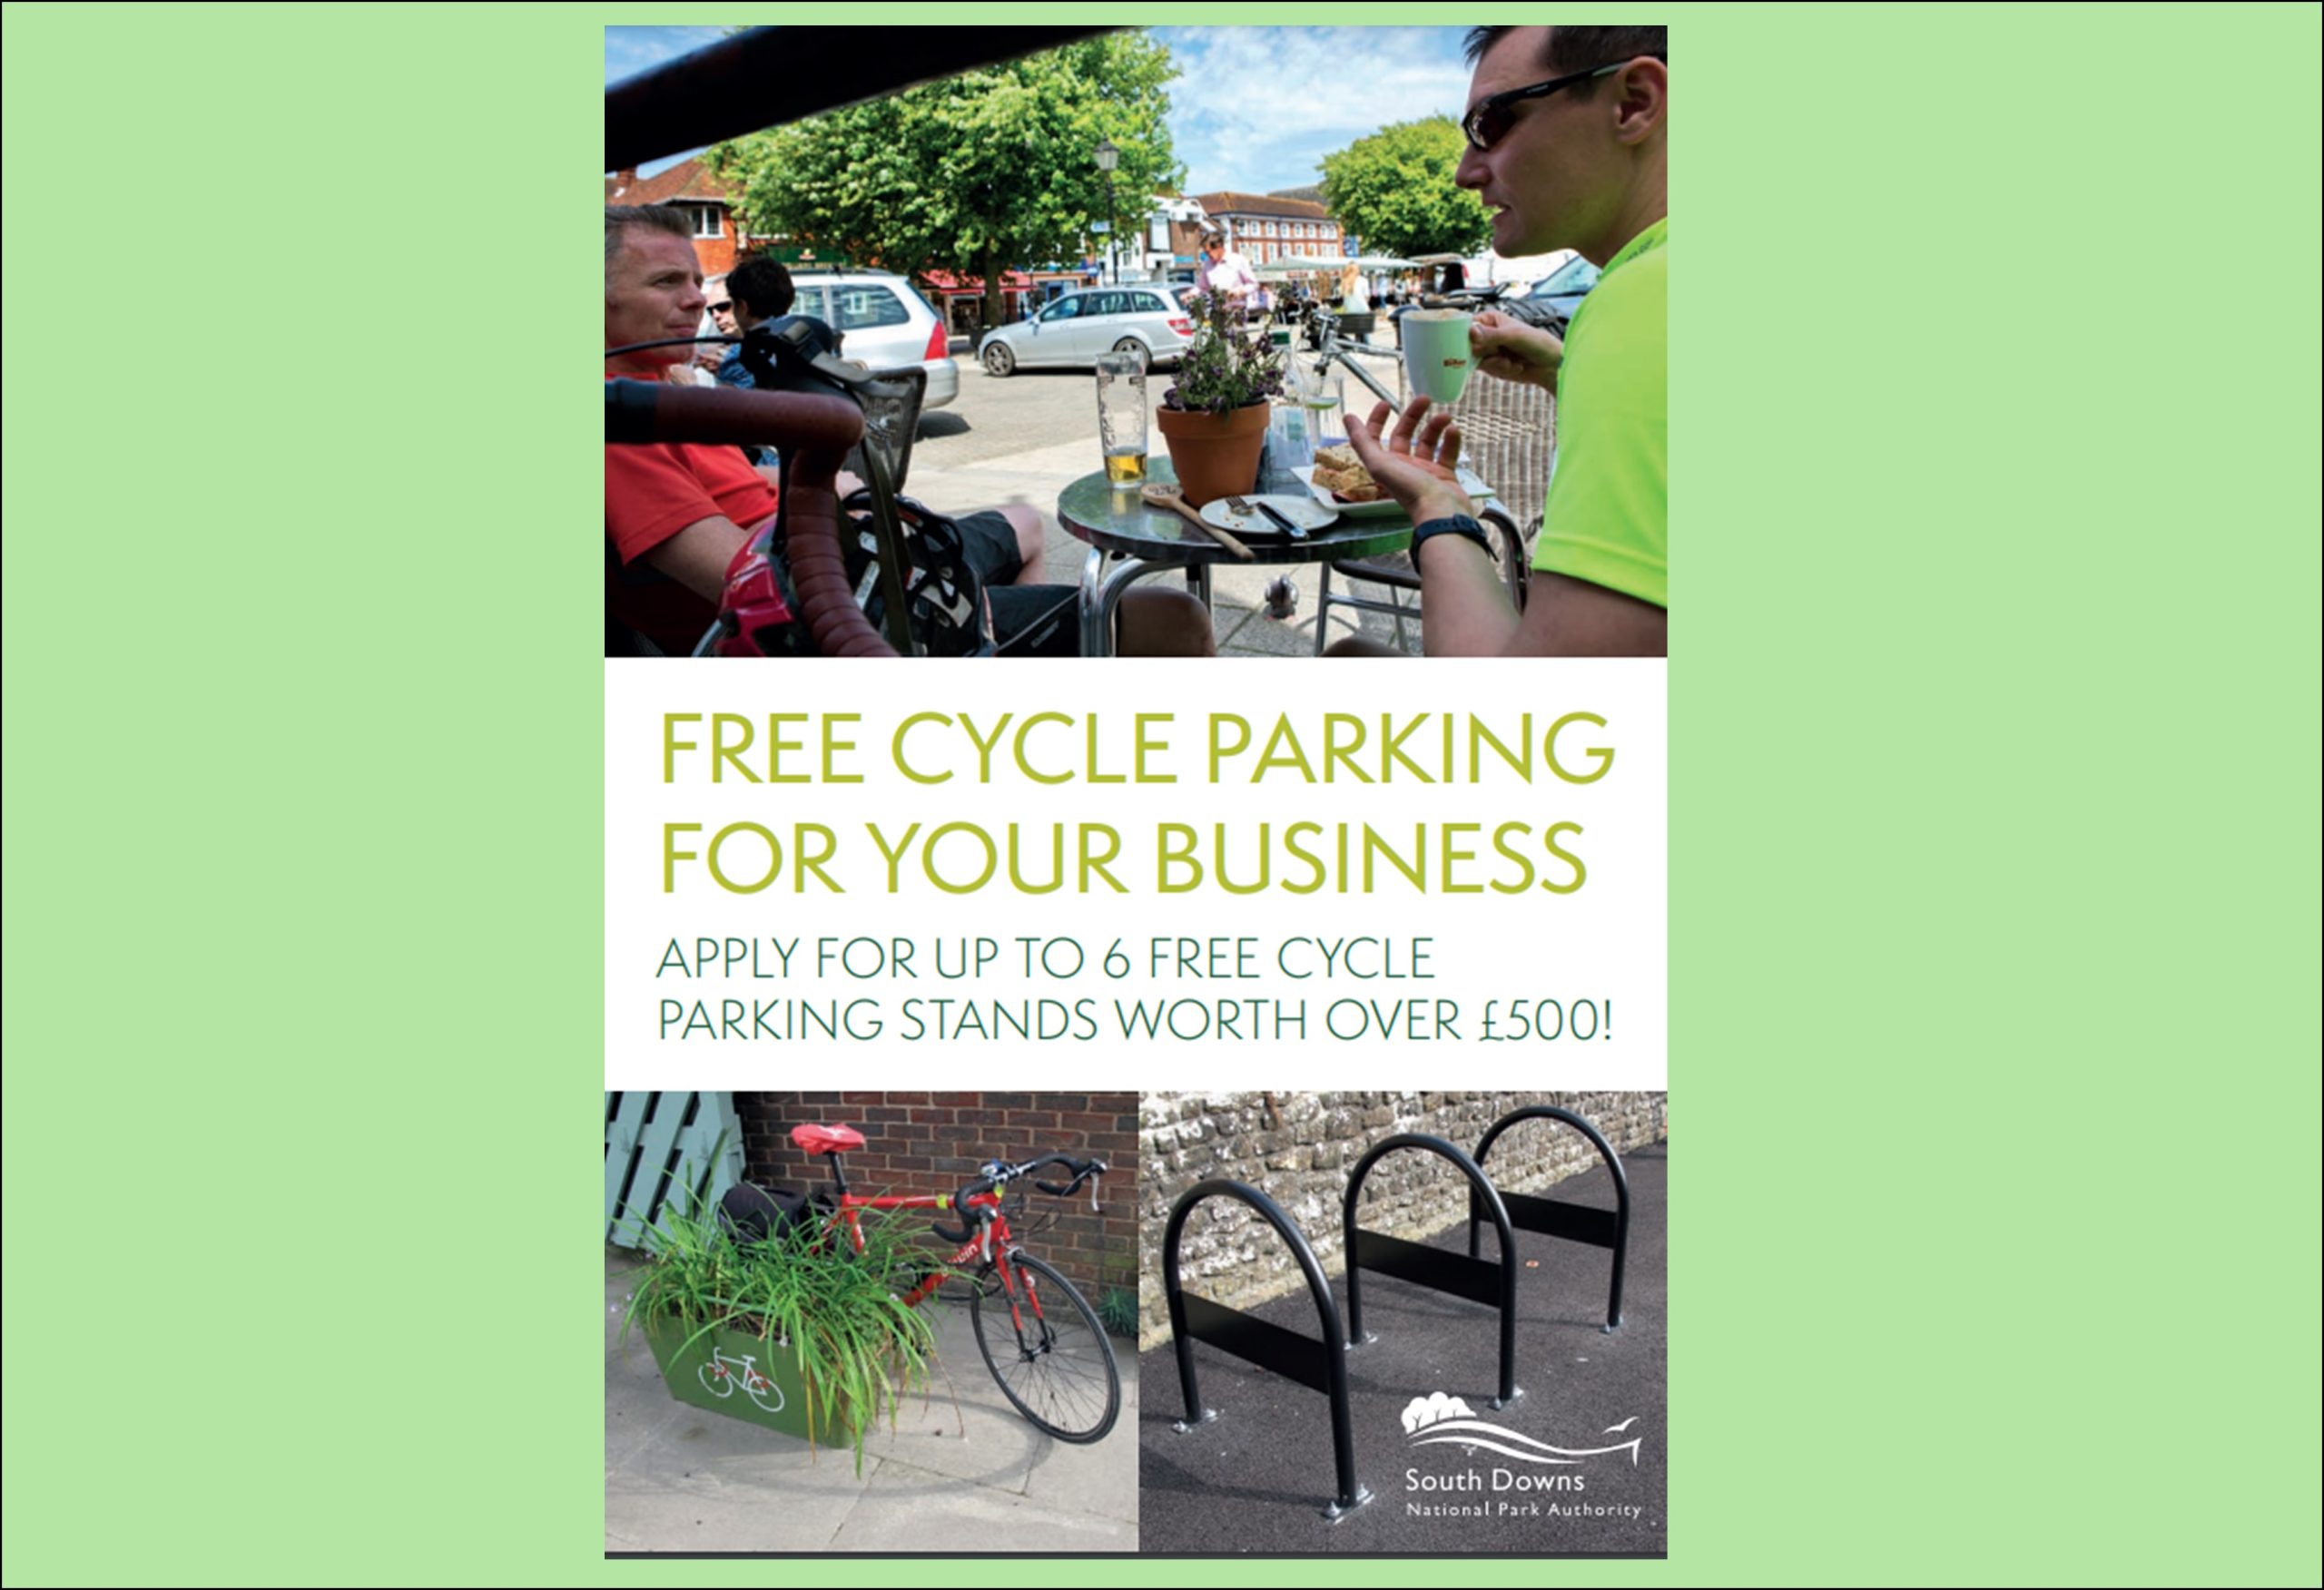 South Downs businesses encouraged to apply for free cycle stands